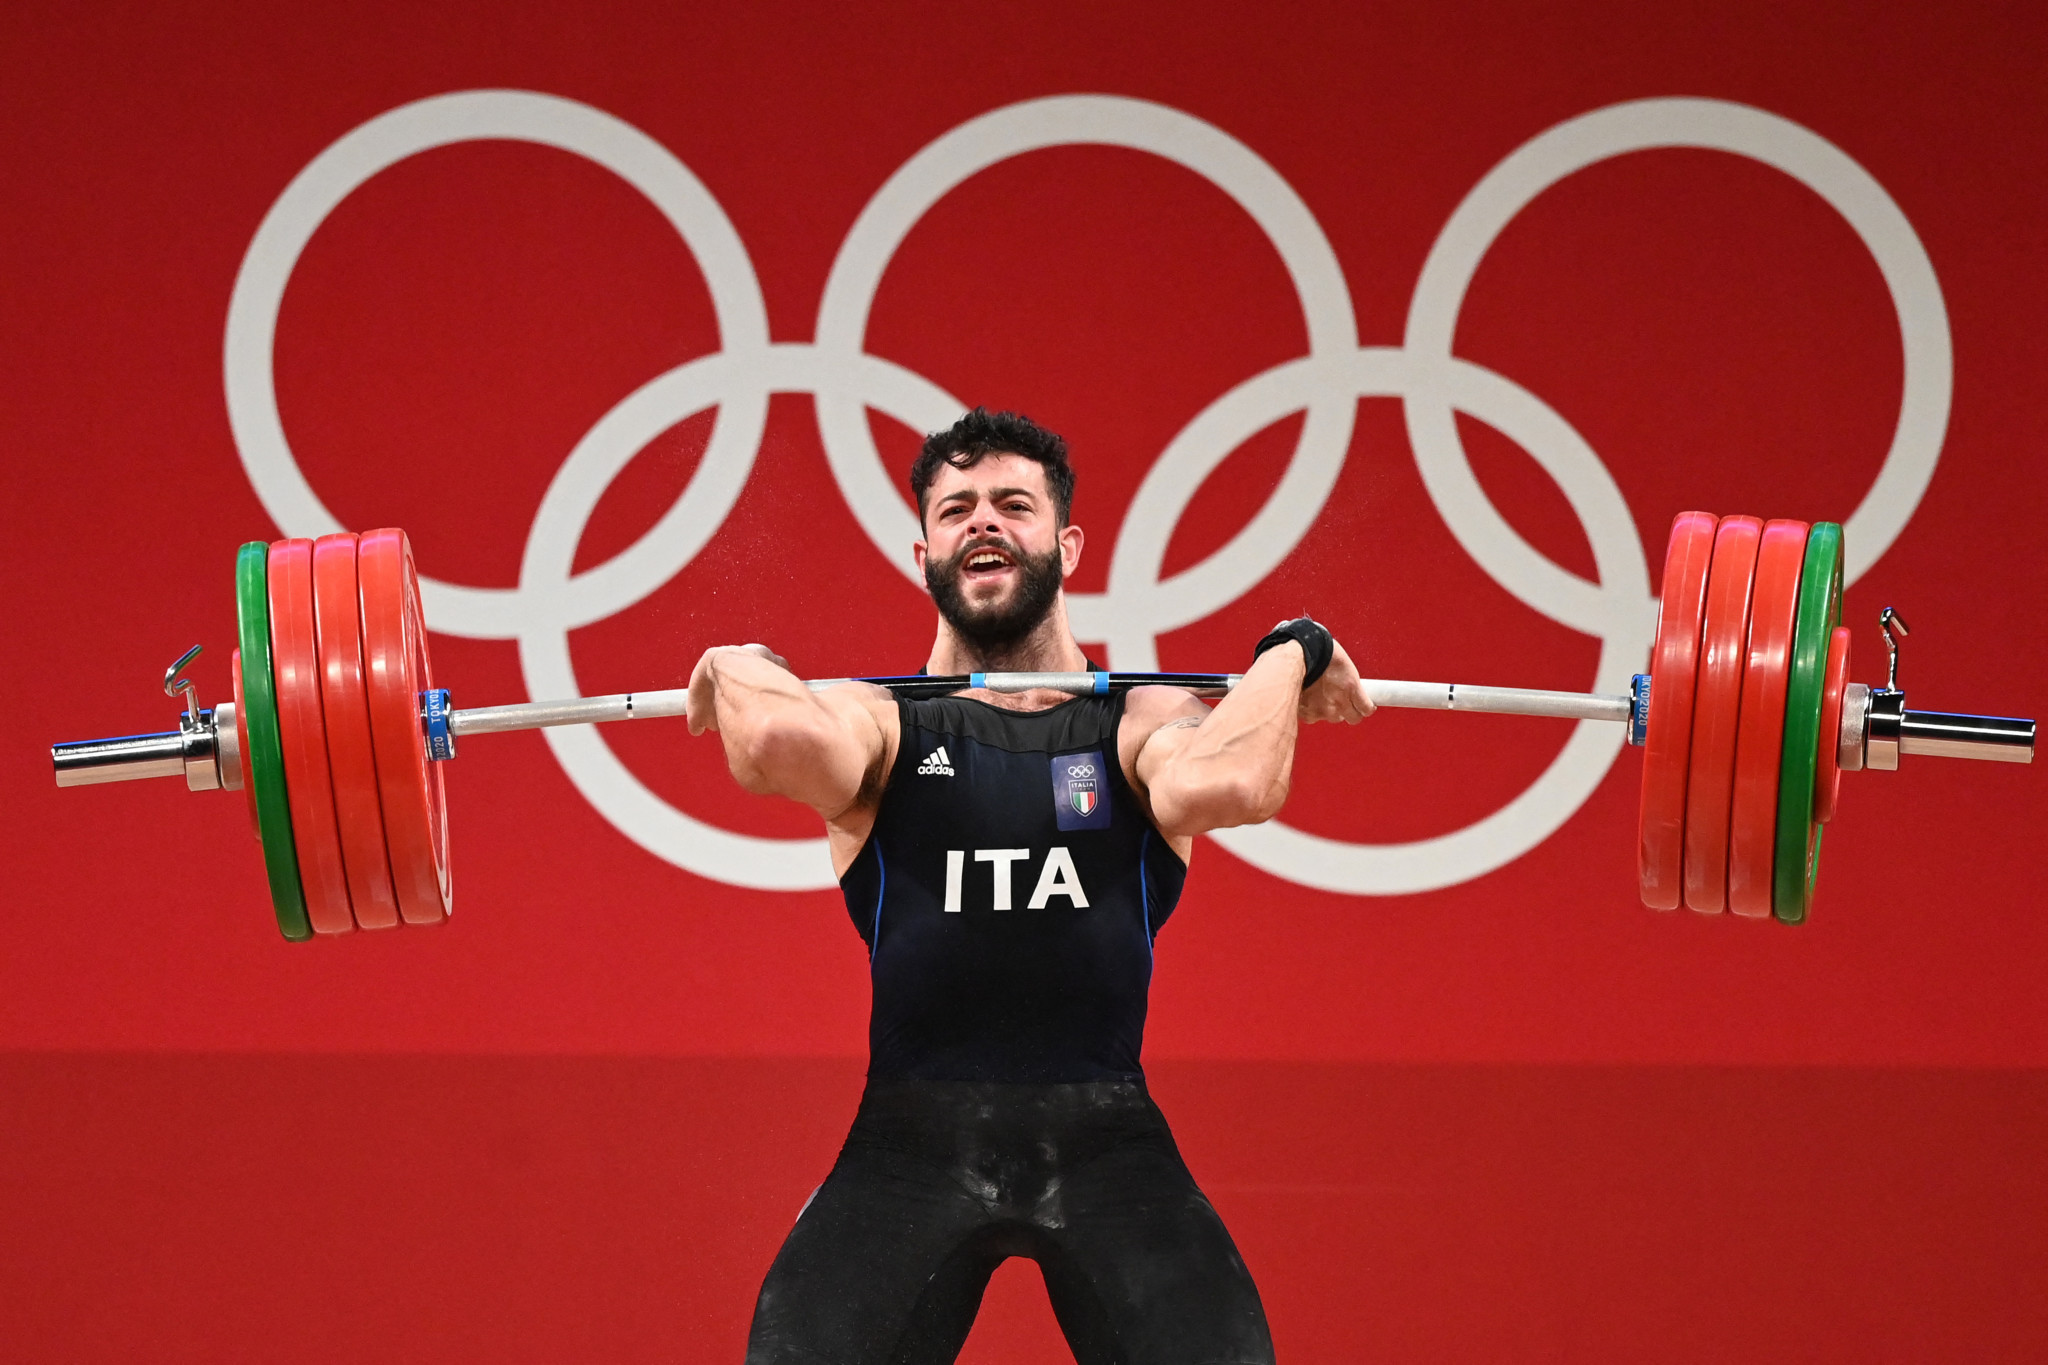 Italian Olympic bronze medallist Antonino Pizzolato will make his return from injury at the European Weightlifting Championships in Yerevan ©Getty Images